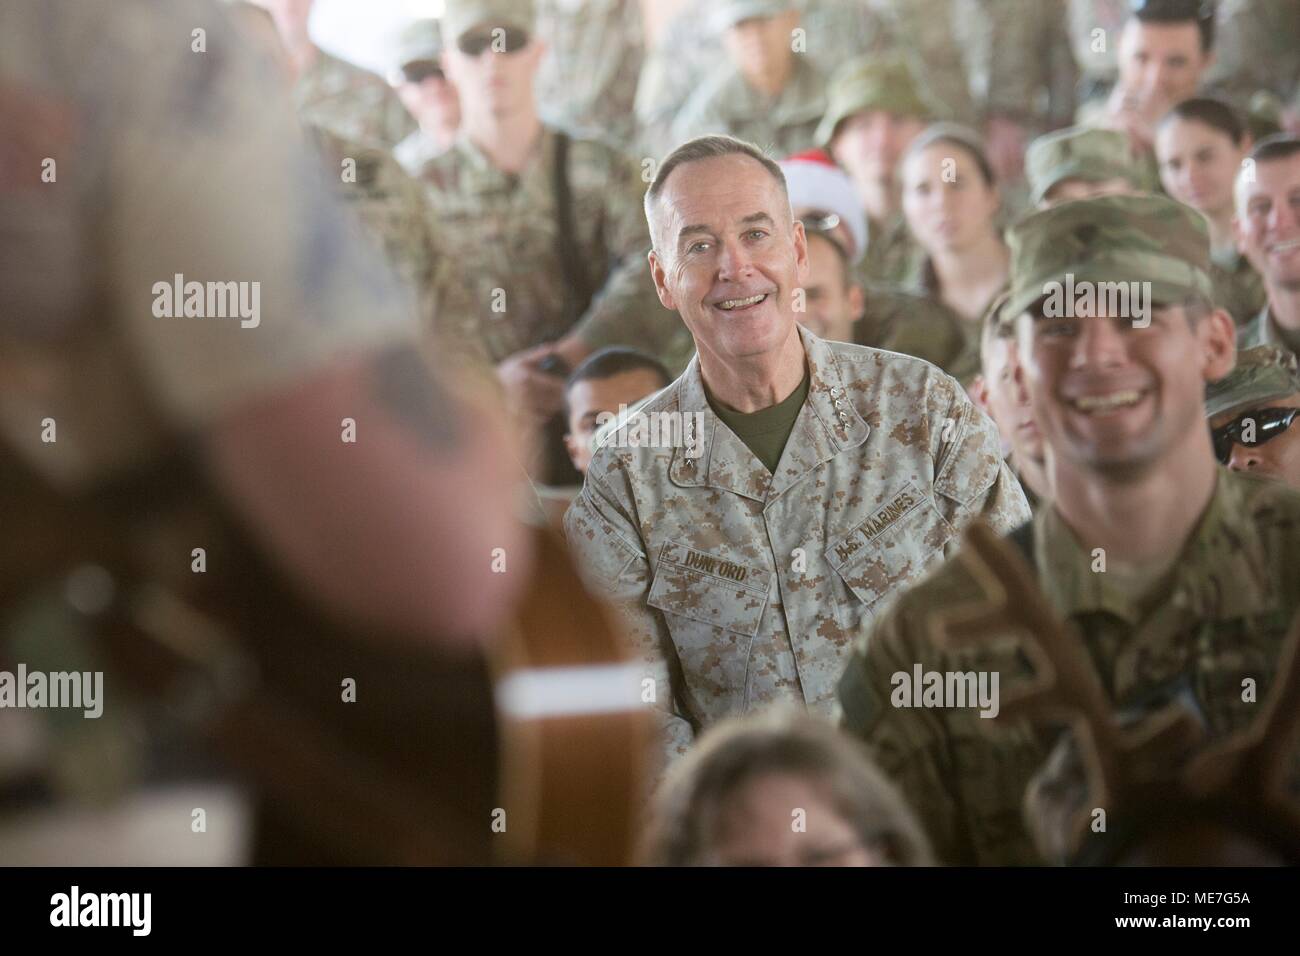 U.S. Joint Chiefs of Staff Chairman Joseph Dunford watches country music singer Jerrod Niemann perform for U.S. soldiers during the USO Holiday Tour at Camp Taji December 25, 2017 in Taji, Iraq.   (photo by Dominique A. Pineiro via Planetpix) Stock Photo